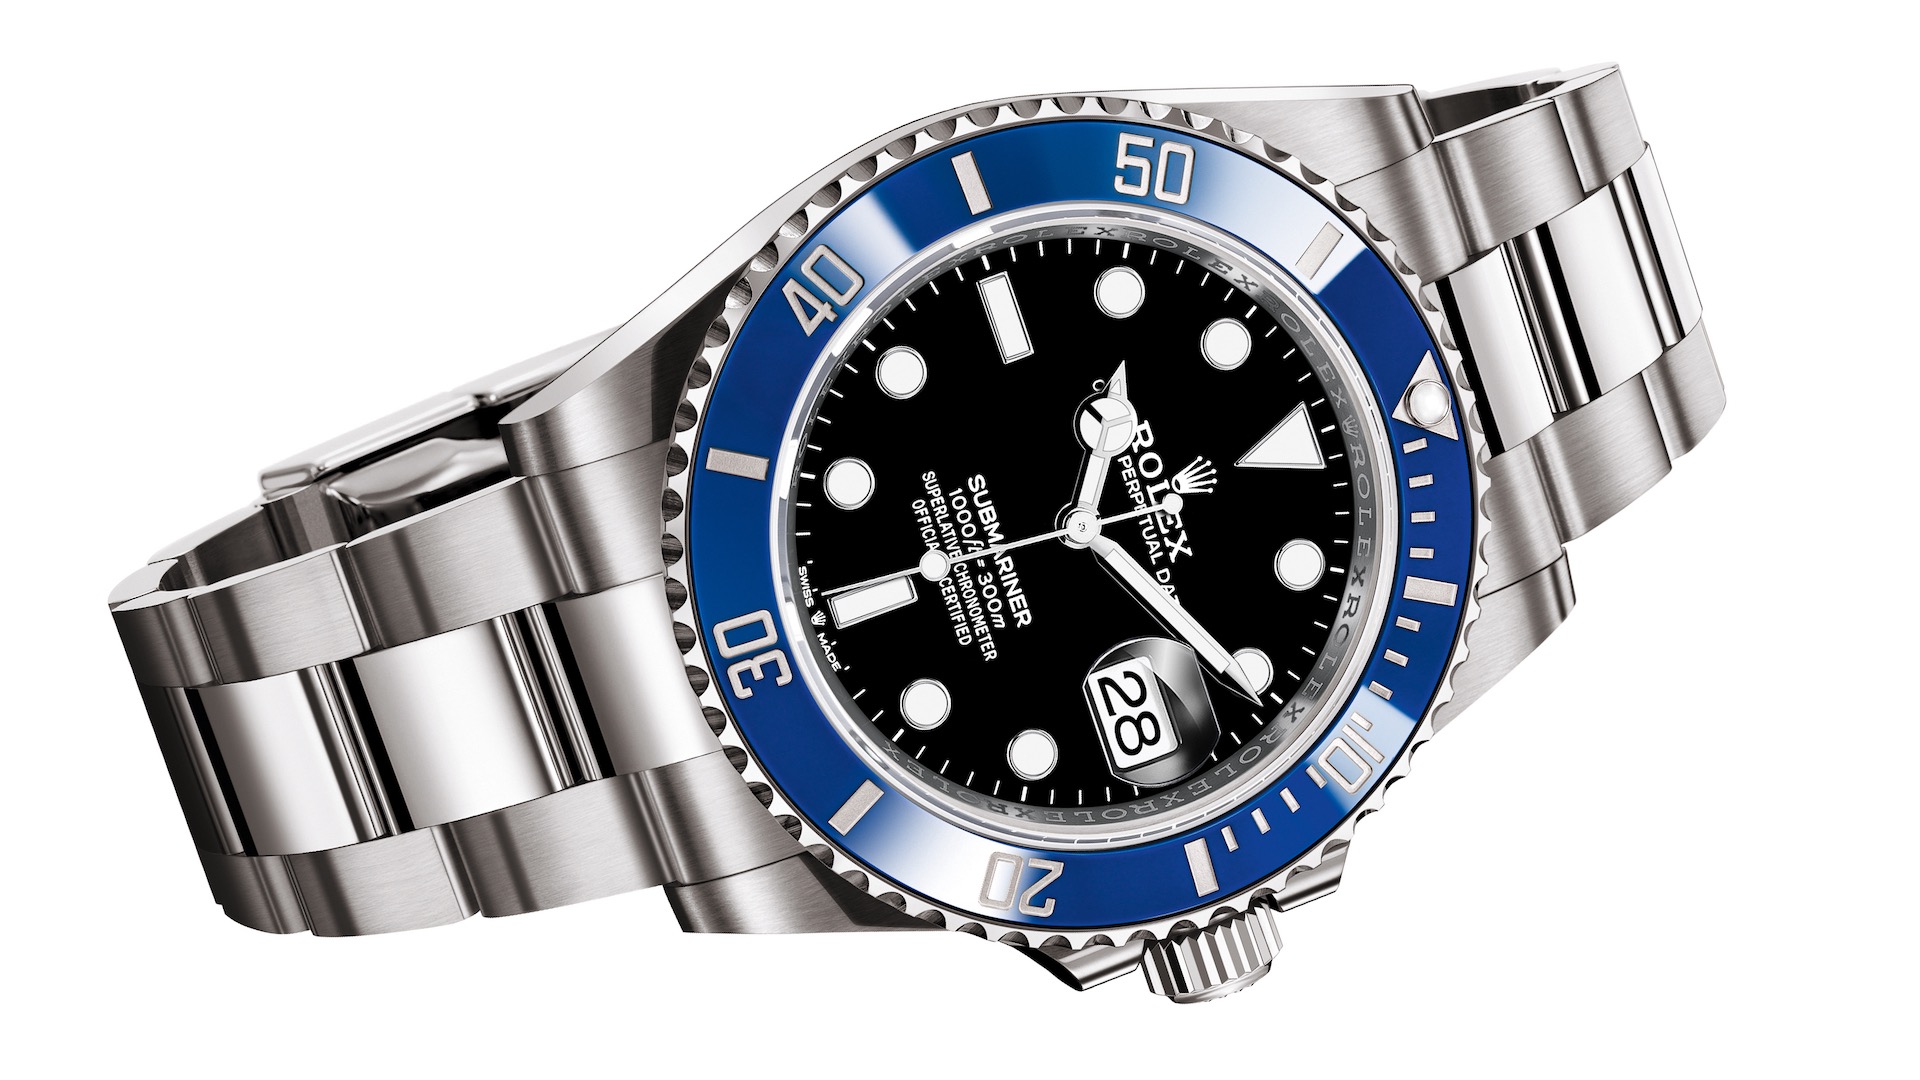 availability of rolex submariner